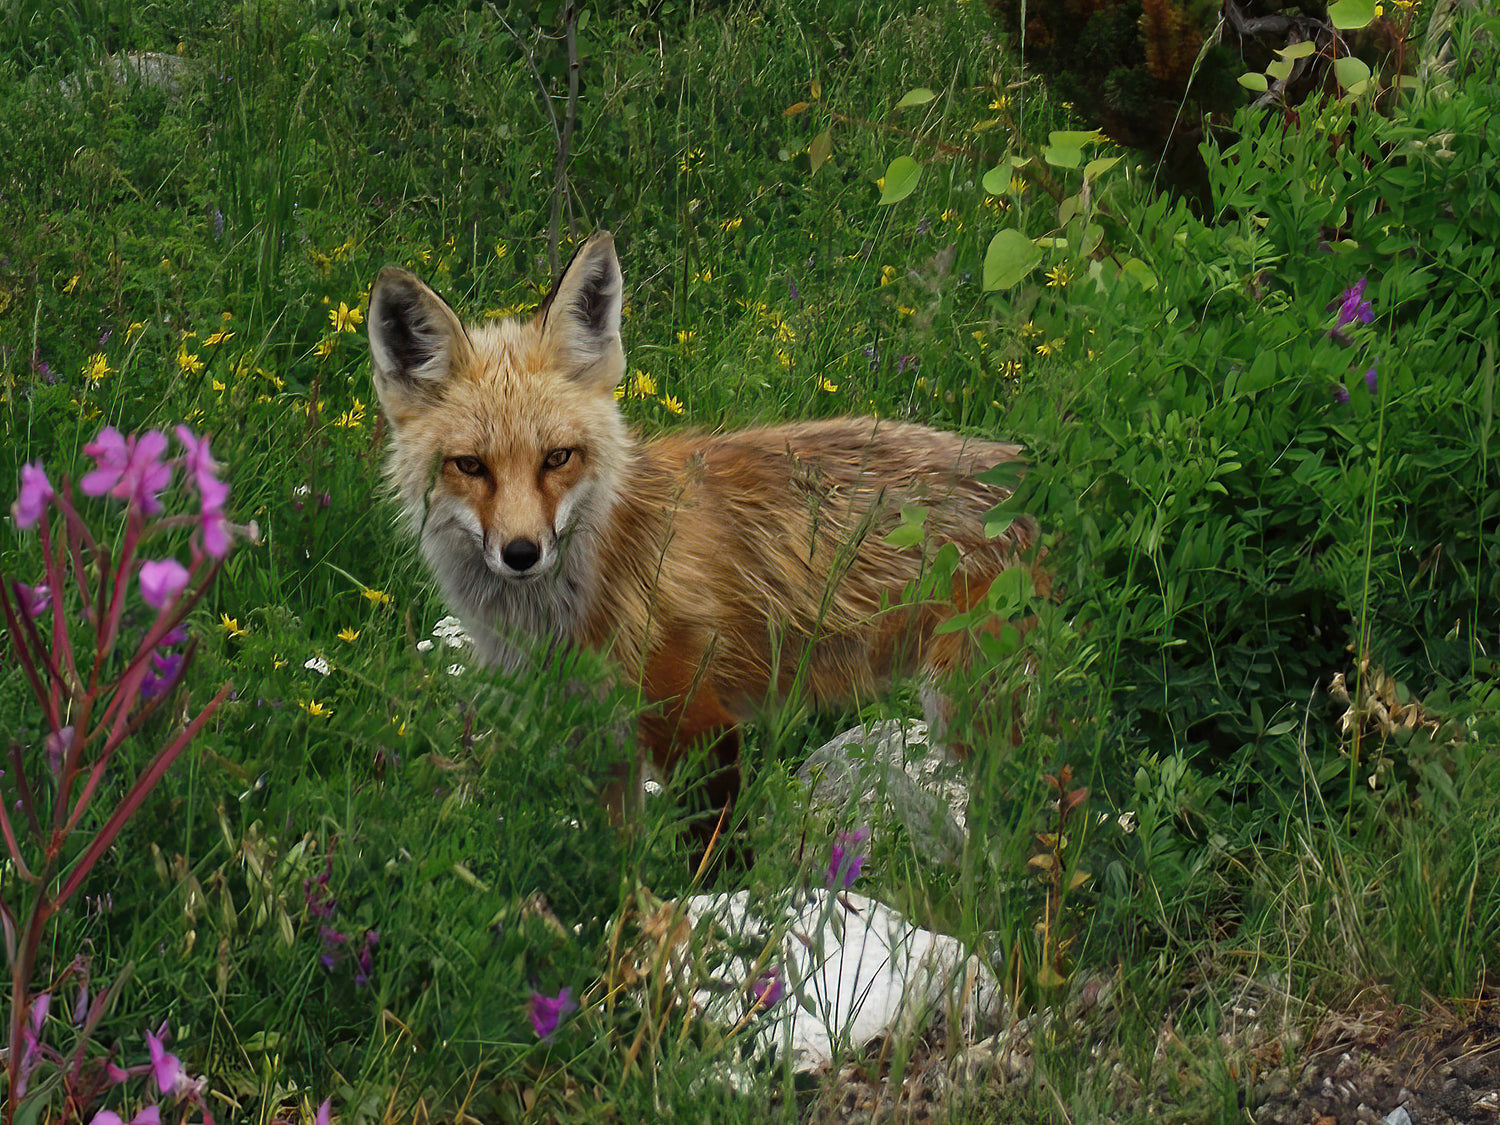 Young red fox in a field of wildflowers. Fine art paper and metal prints for sale. Star to Star Photography Landscape wildlife and nature phototography